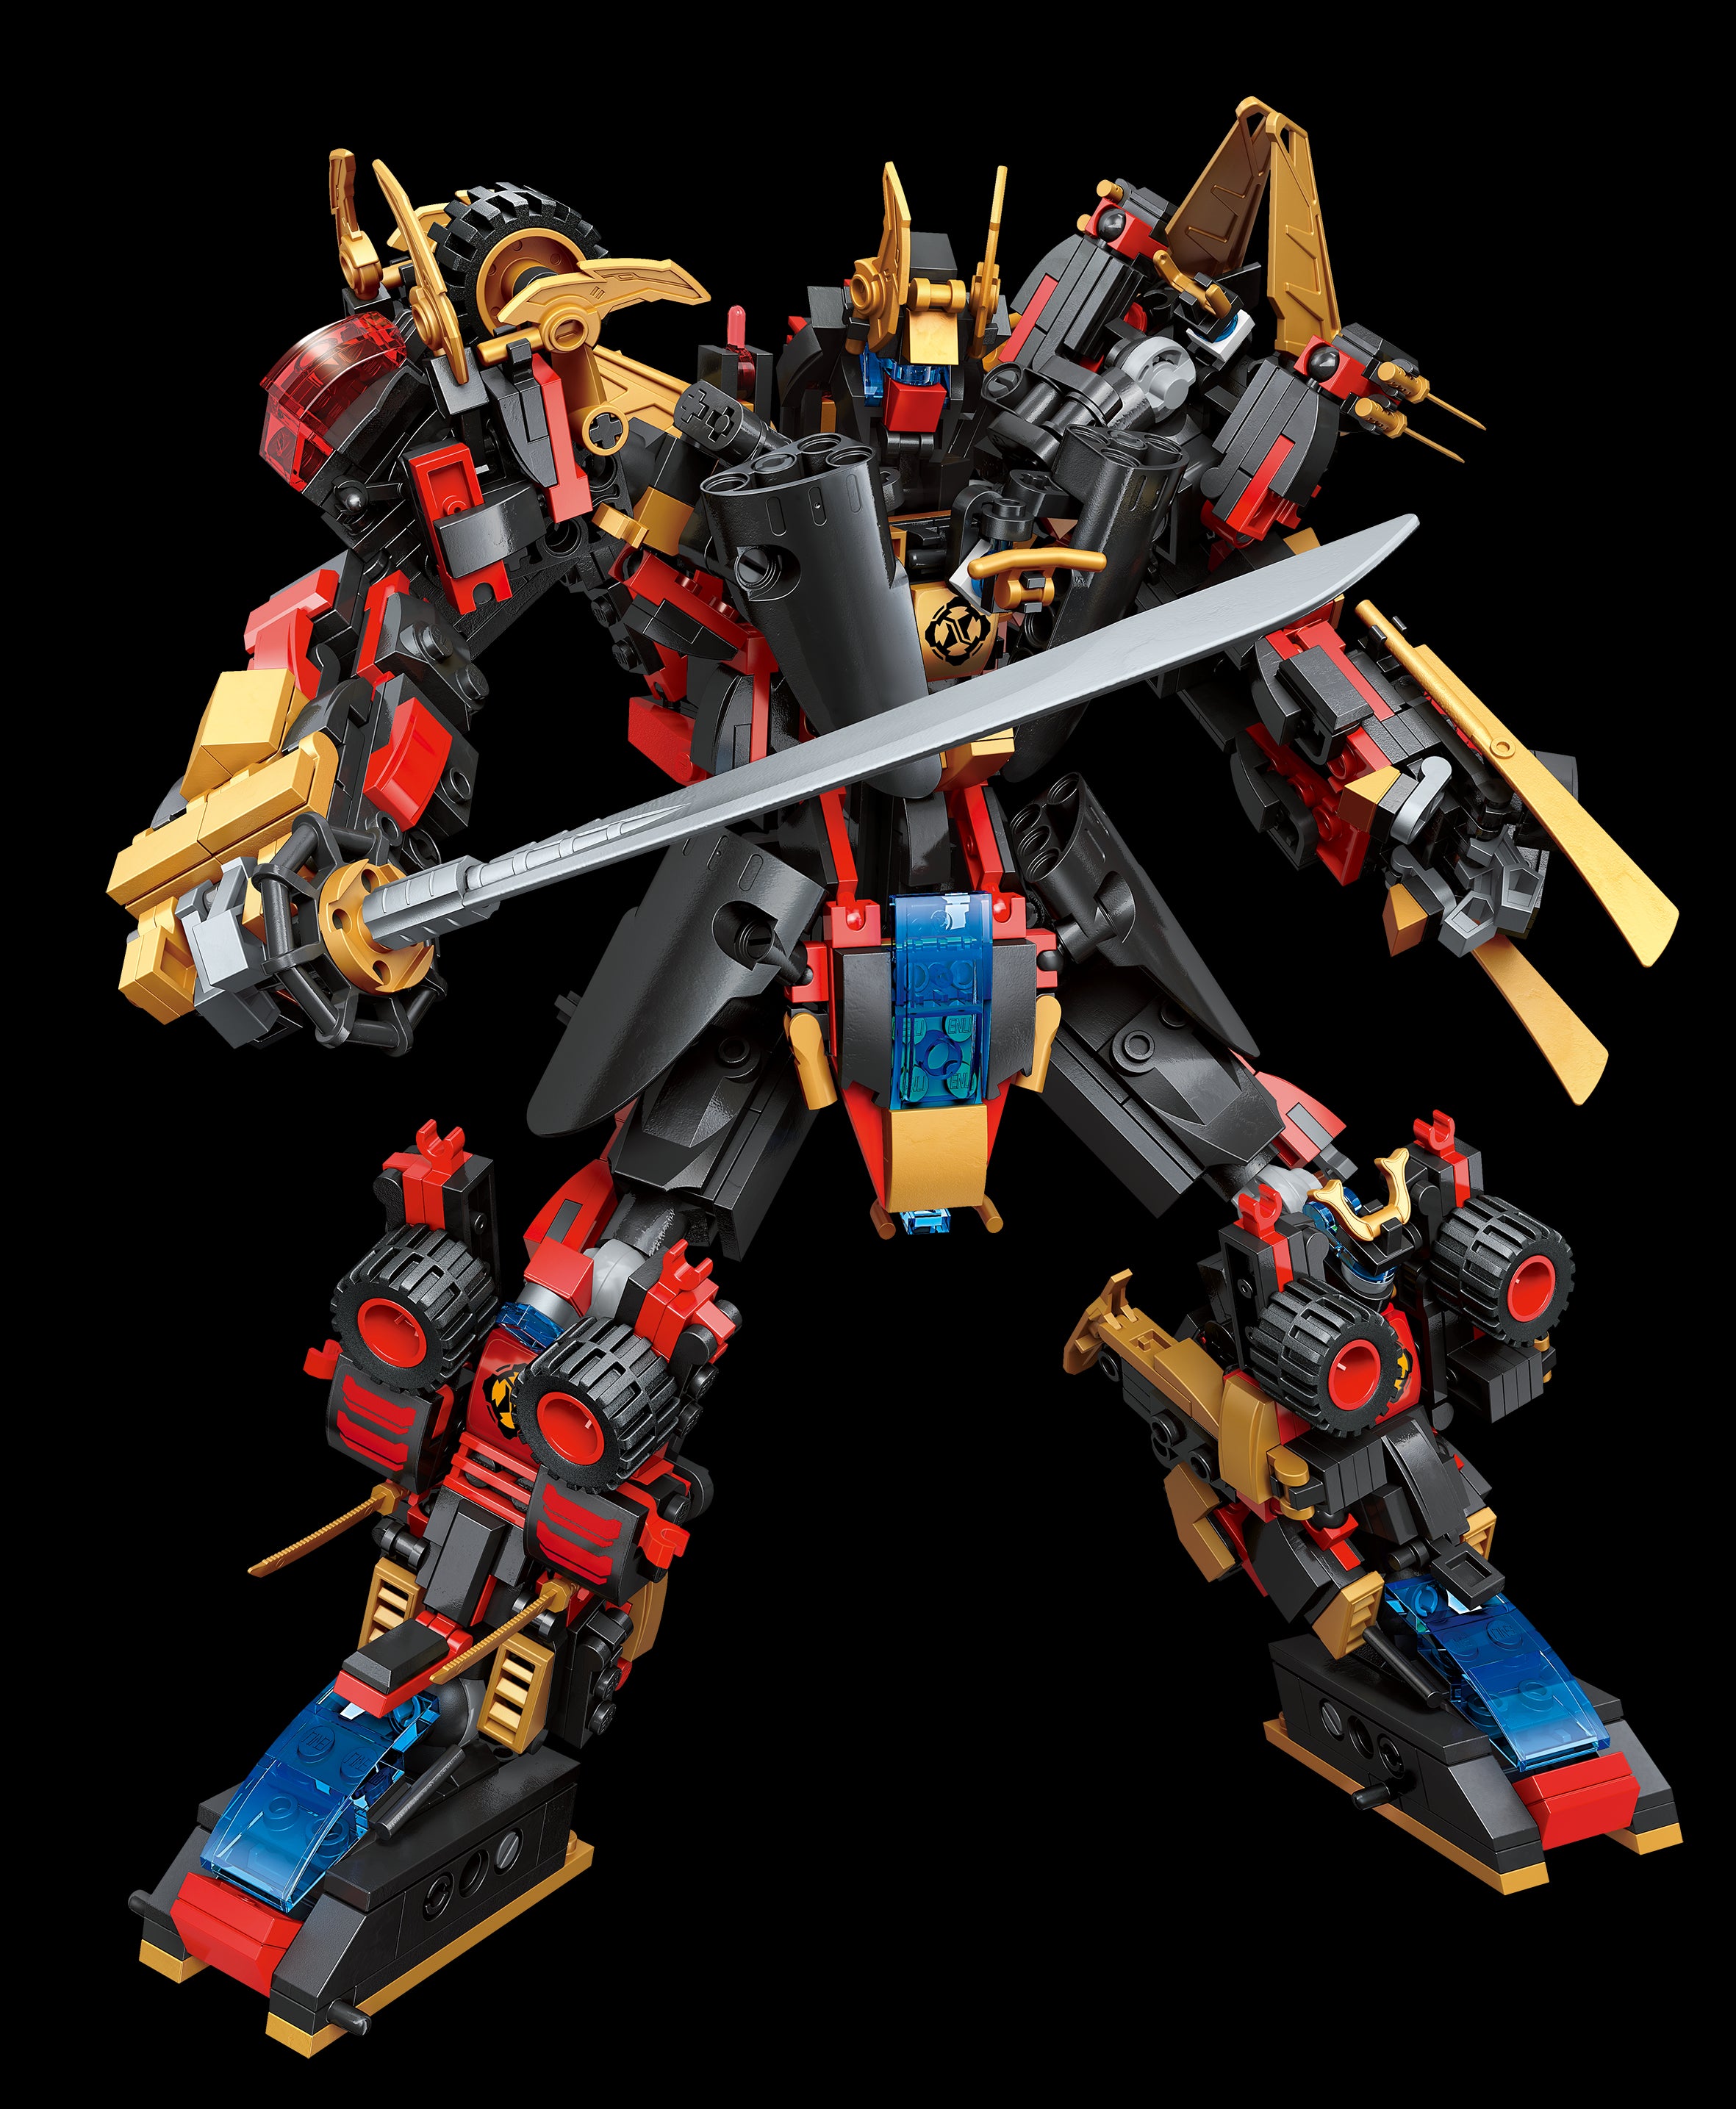 MINISO 6-IN-1 TRANSFORMING ASTRAL WARRIOR (6 ASSORTED MODELS) 2012591510101 BUILDING BLOCKS